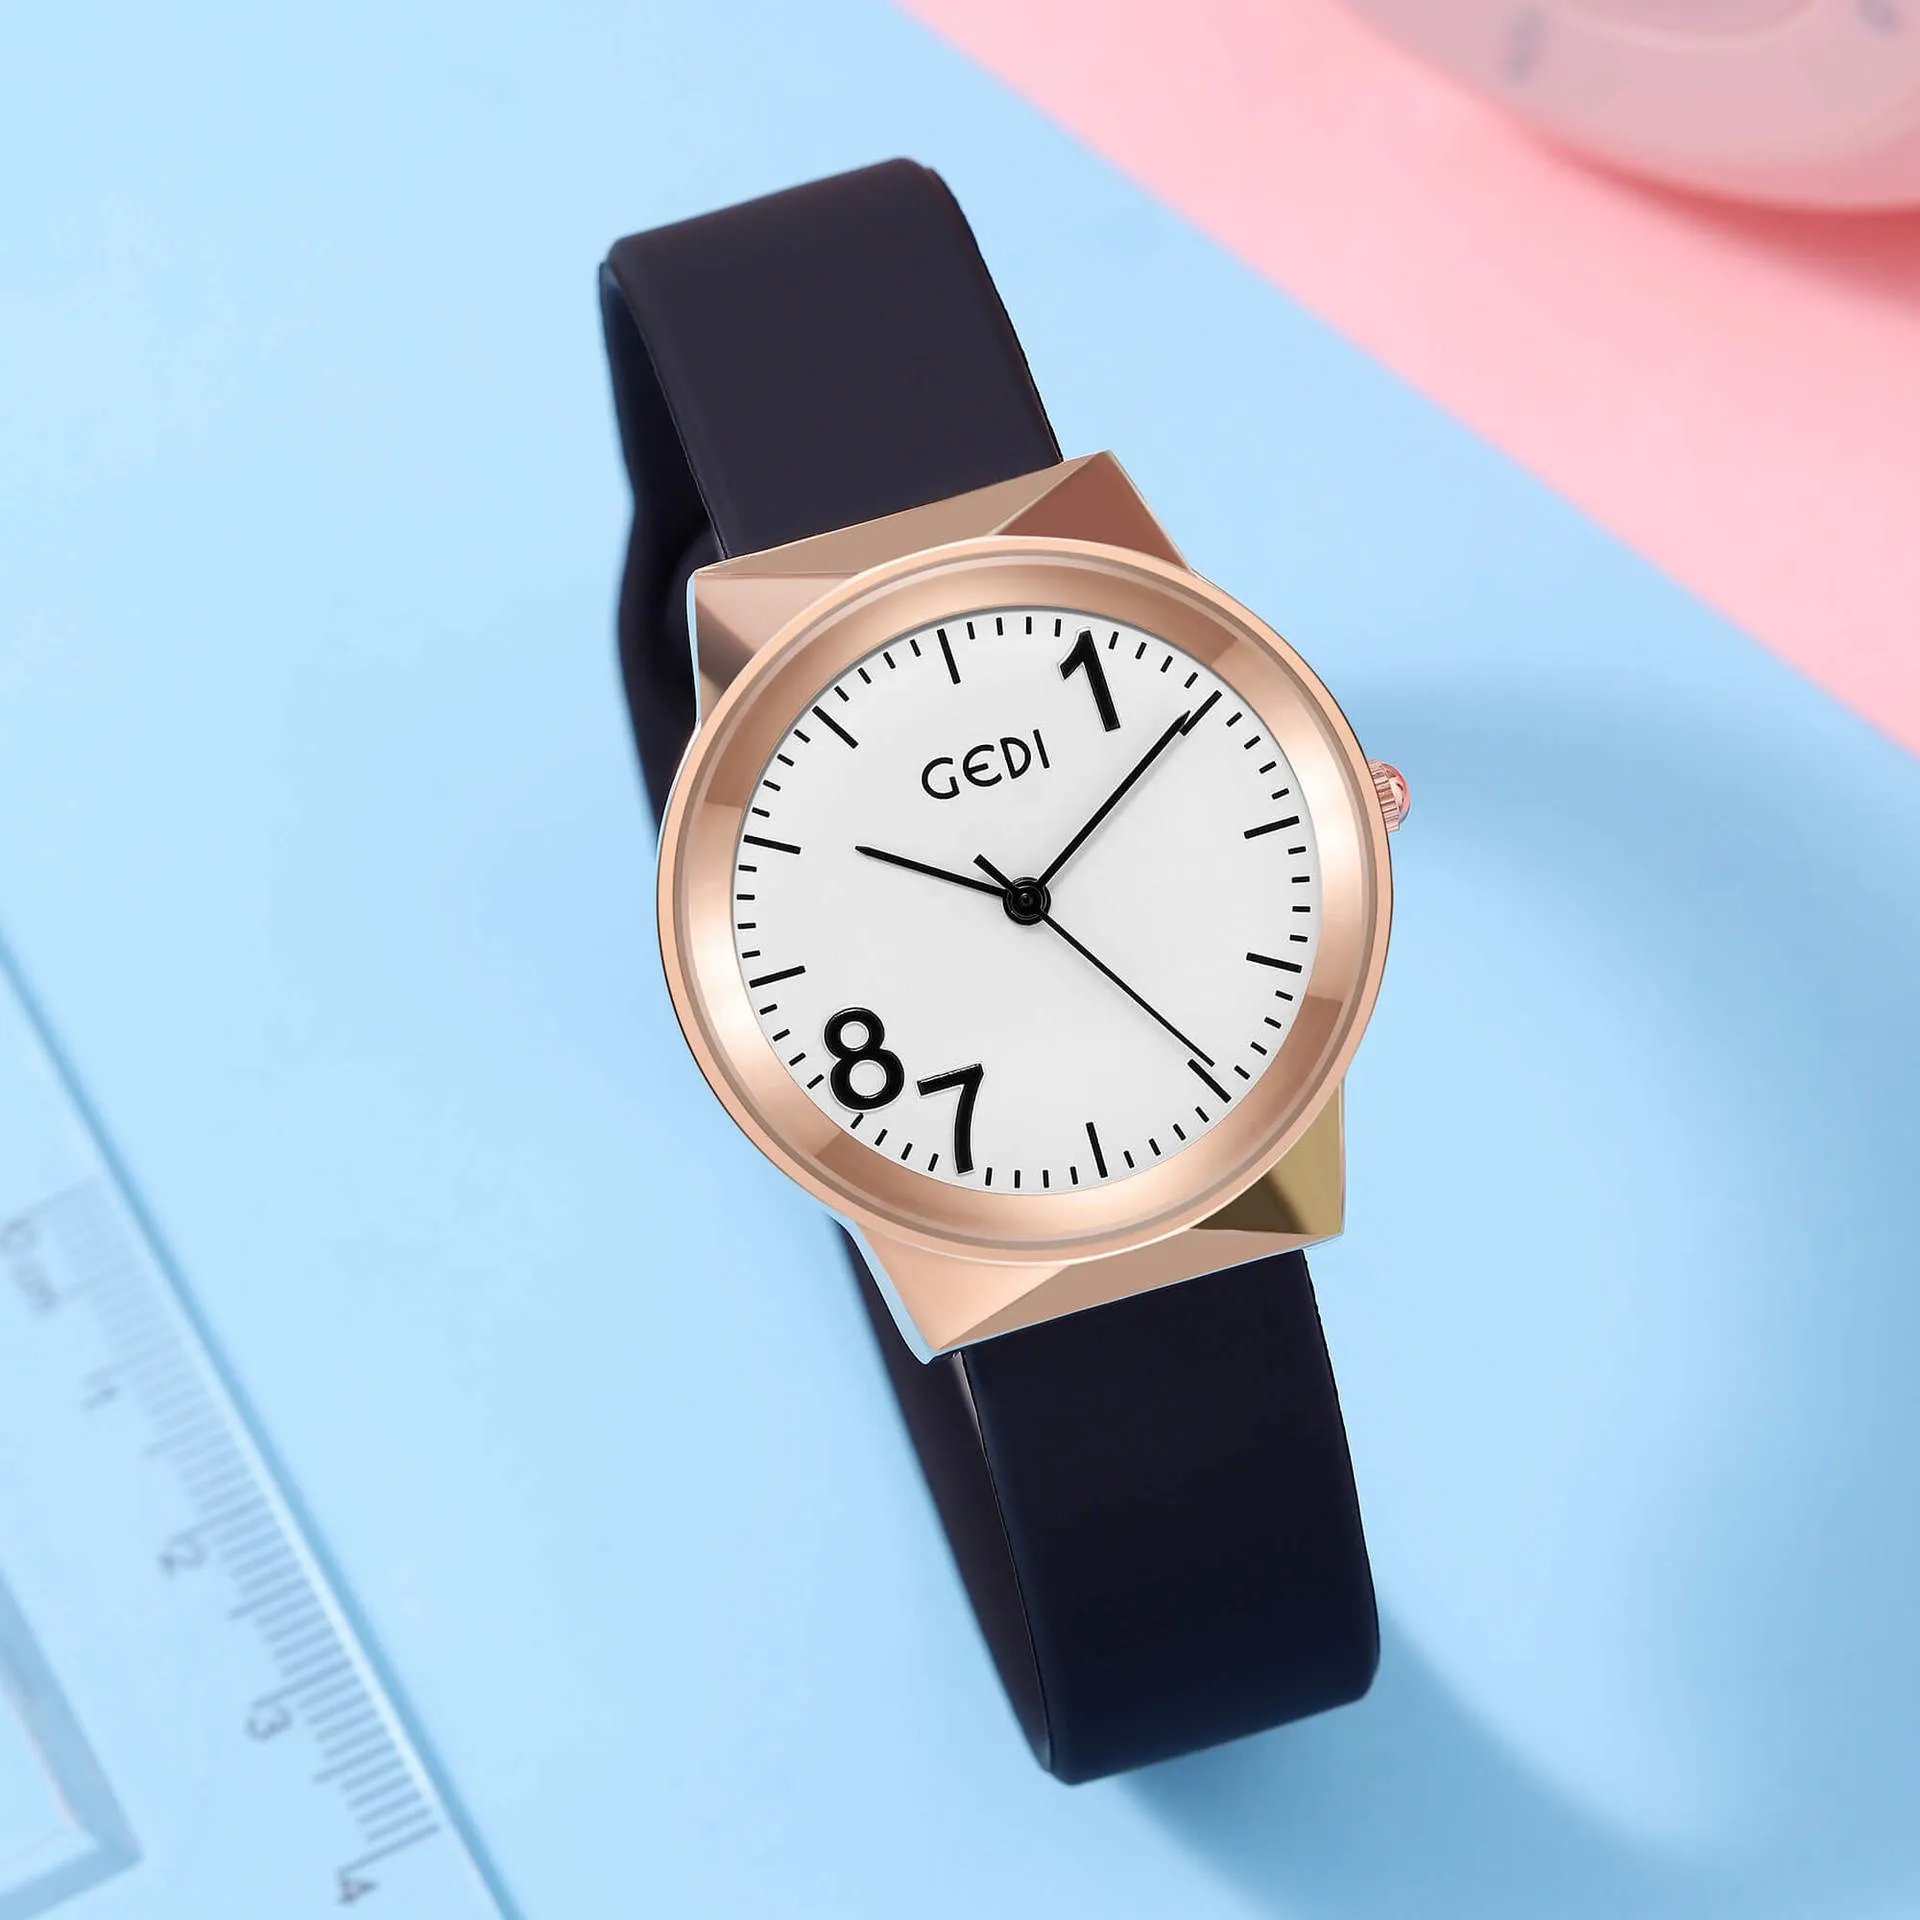 Womens Watch Watches High Quality Luxury Quartz-Batterycasual Silicone Waterproof 33mm Watch A1